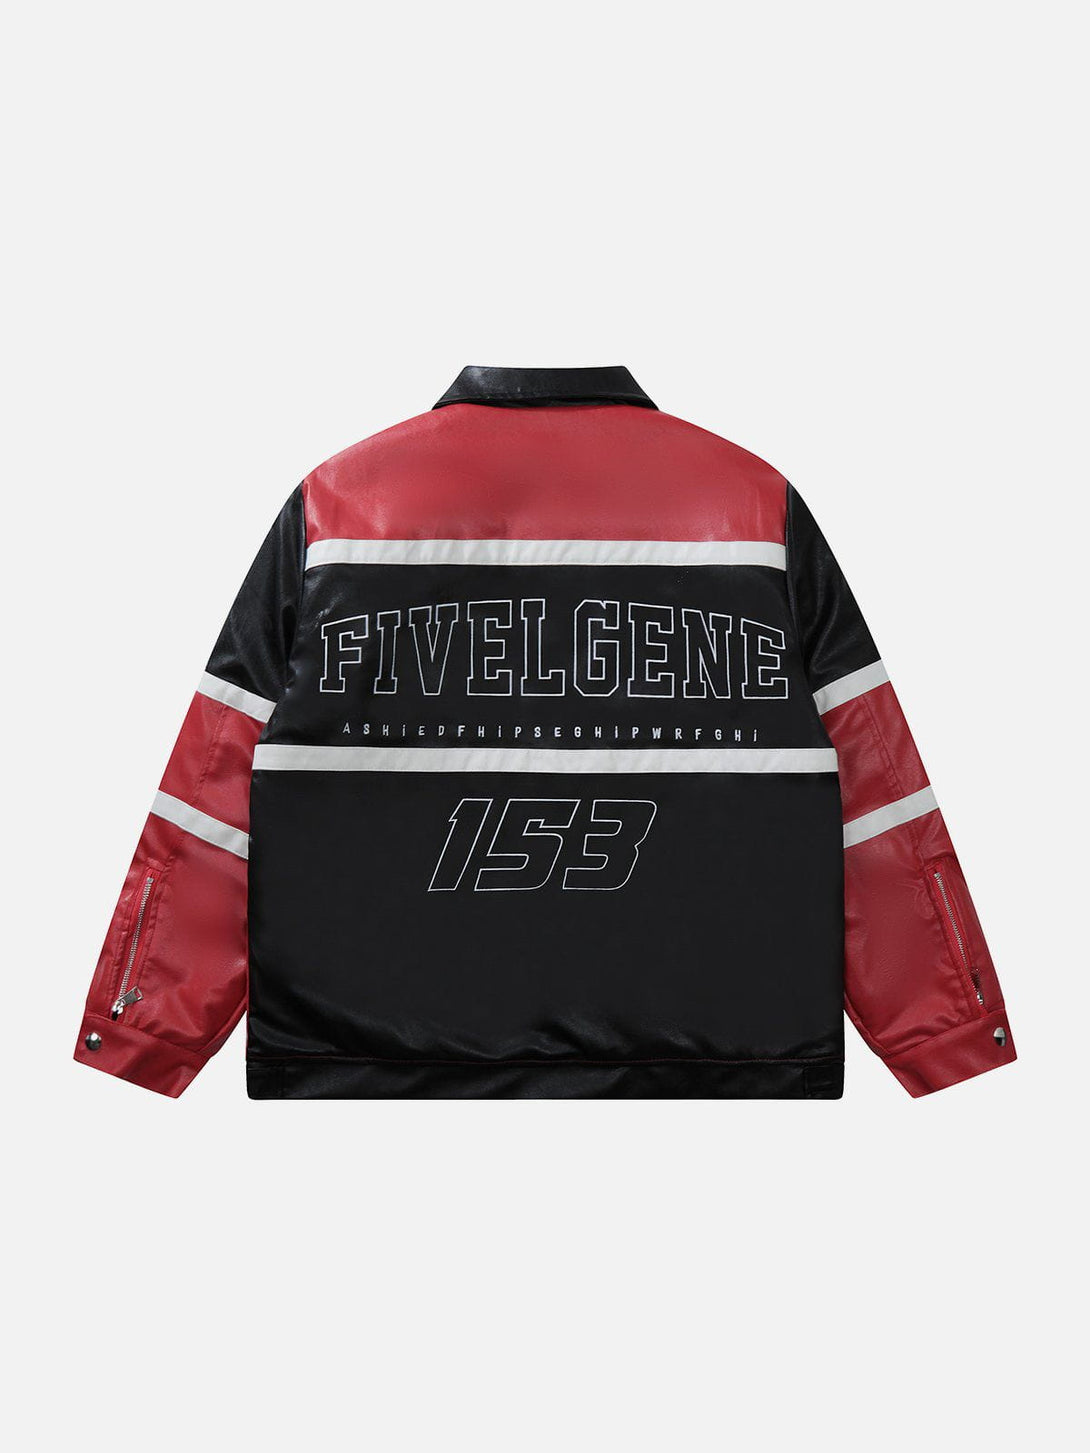 Levefly - Patchwork Embroidered Leather Jacket - Streetwear Fashion - levefly.com